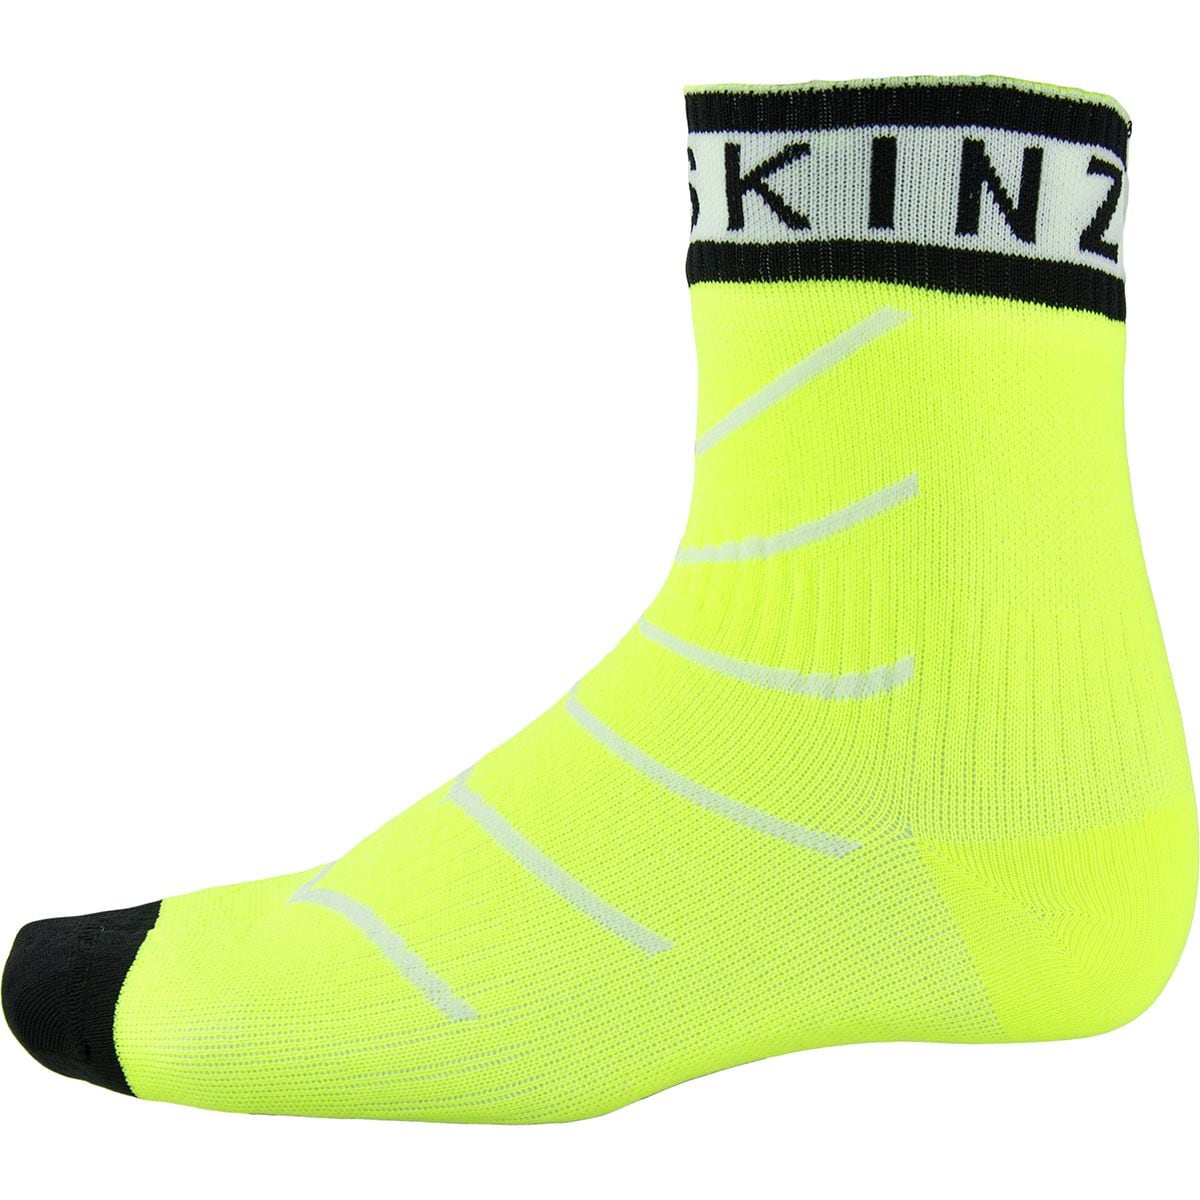 SealSkinz Super Thin Pro Ankle Sock With Hydrostop - Men's